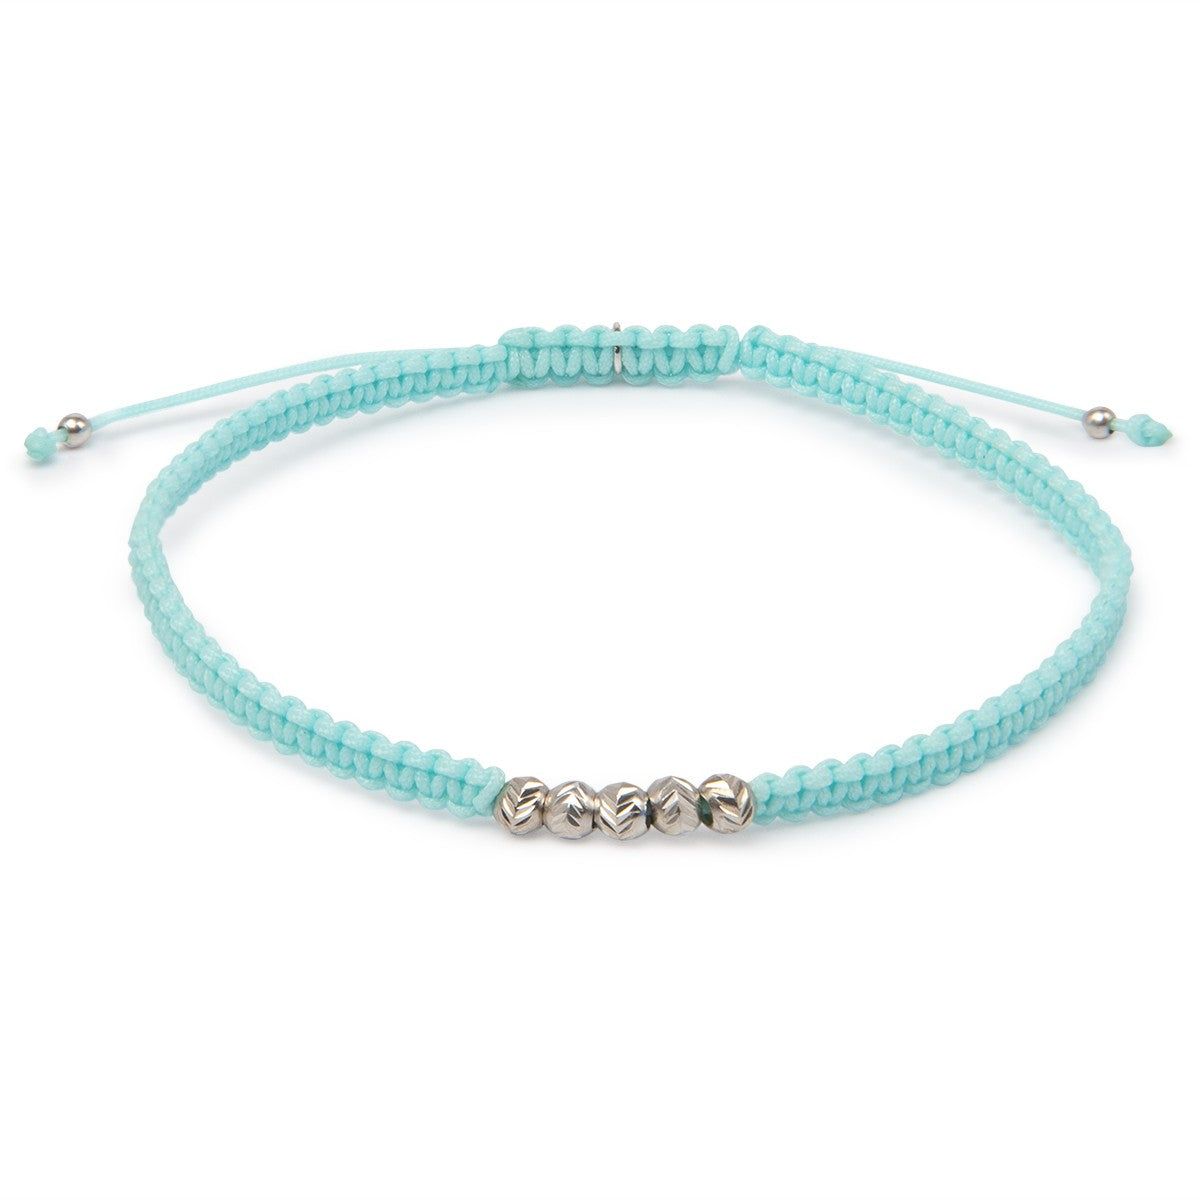 TURQUOISE AND SILVER CORD BRACELET 16CM